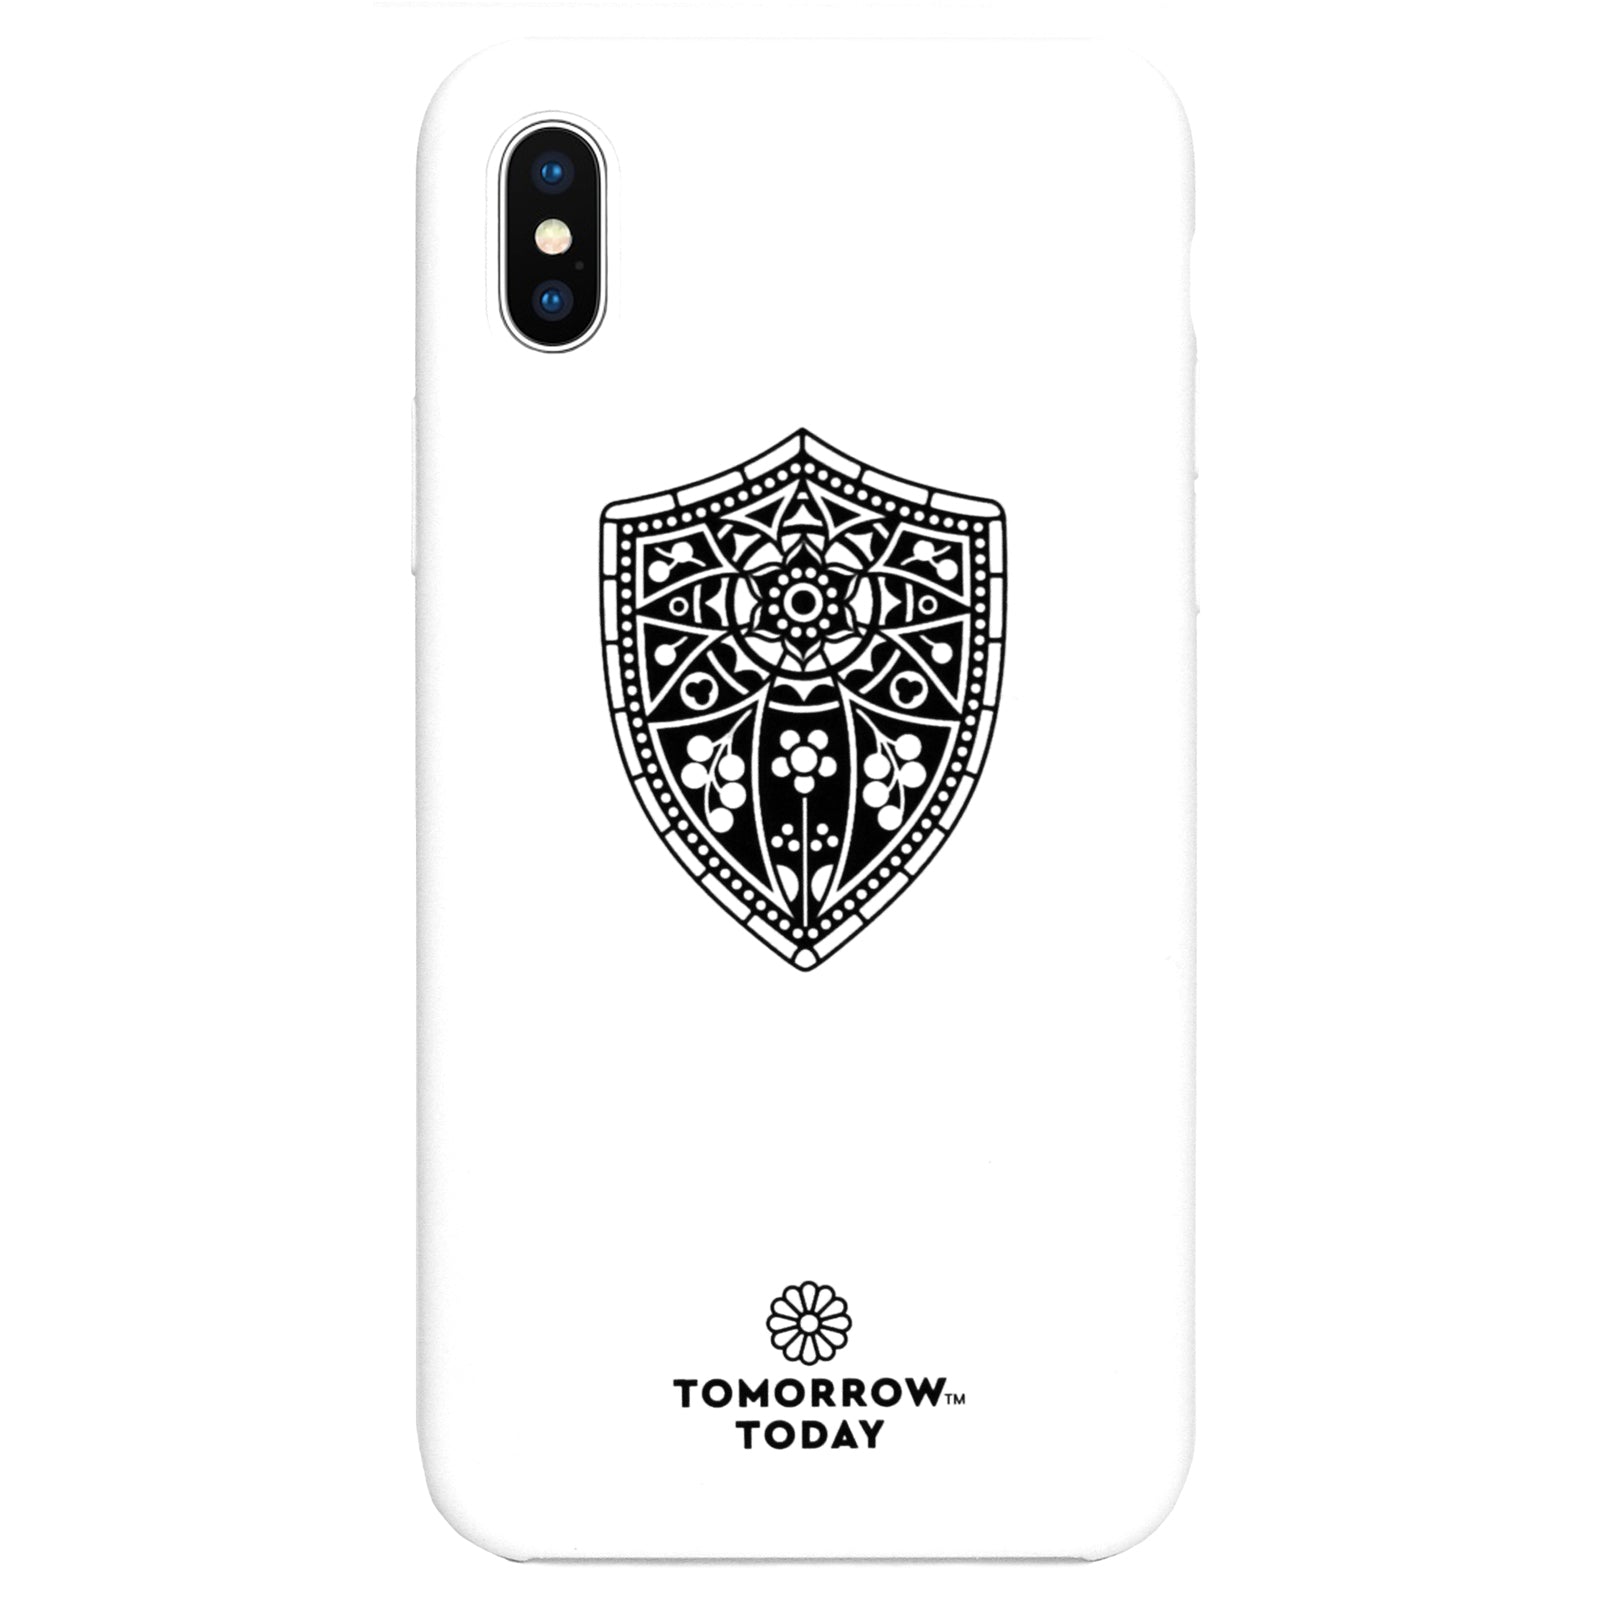 The Shield - iPhone X Case